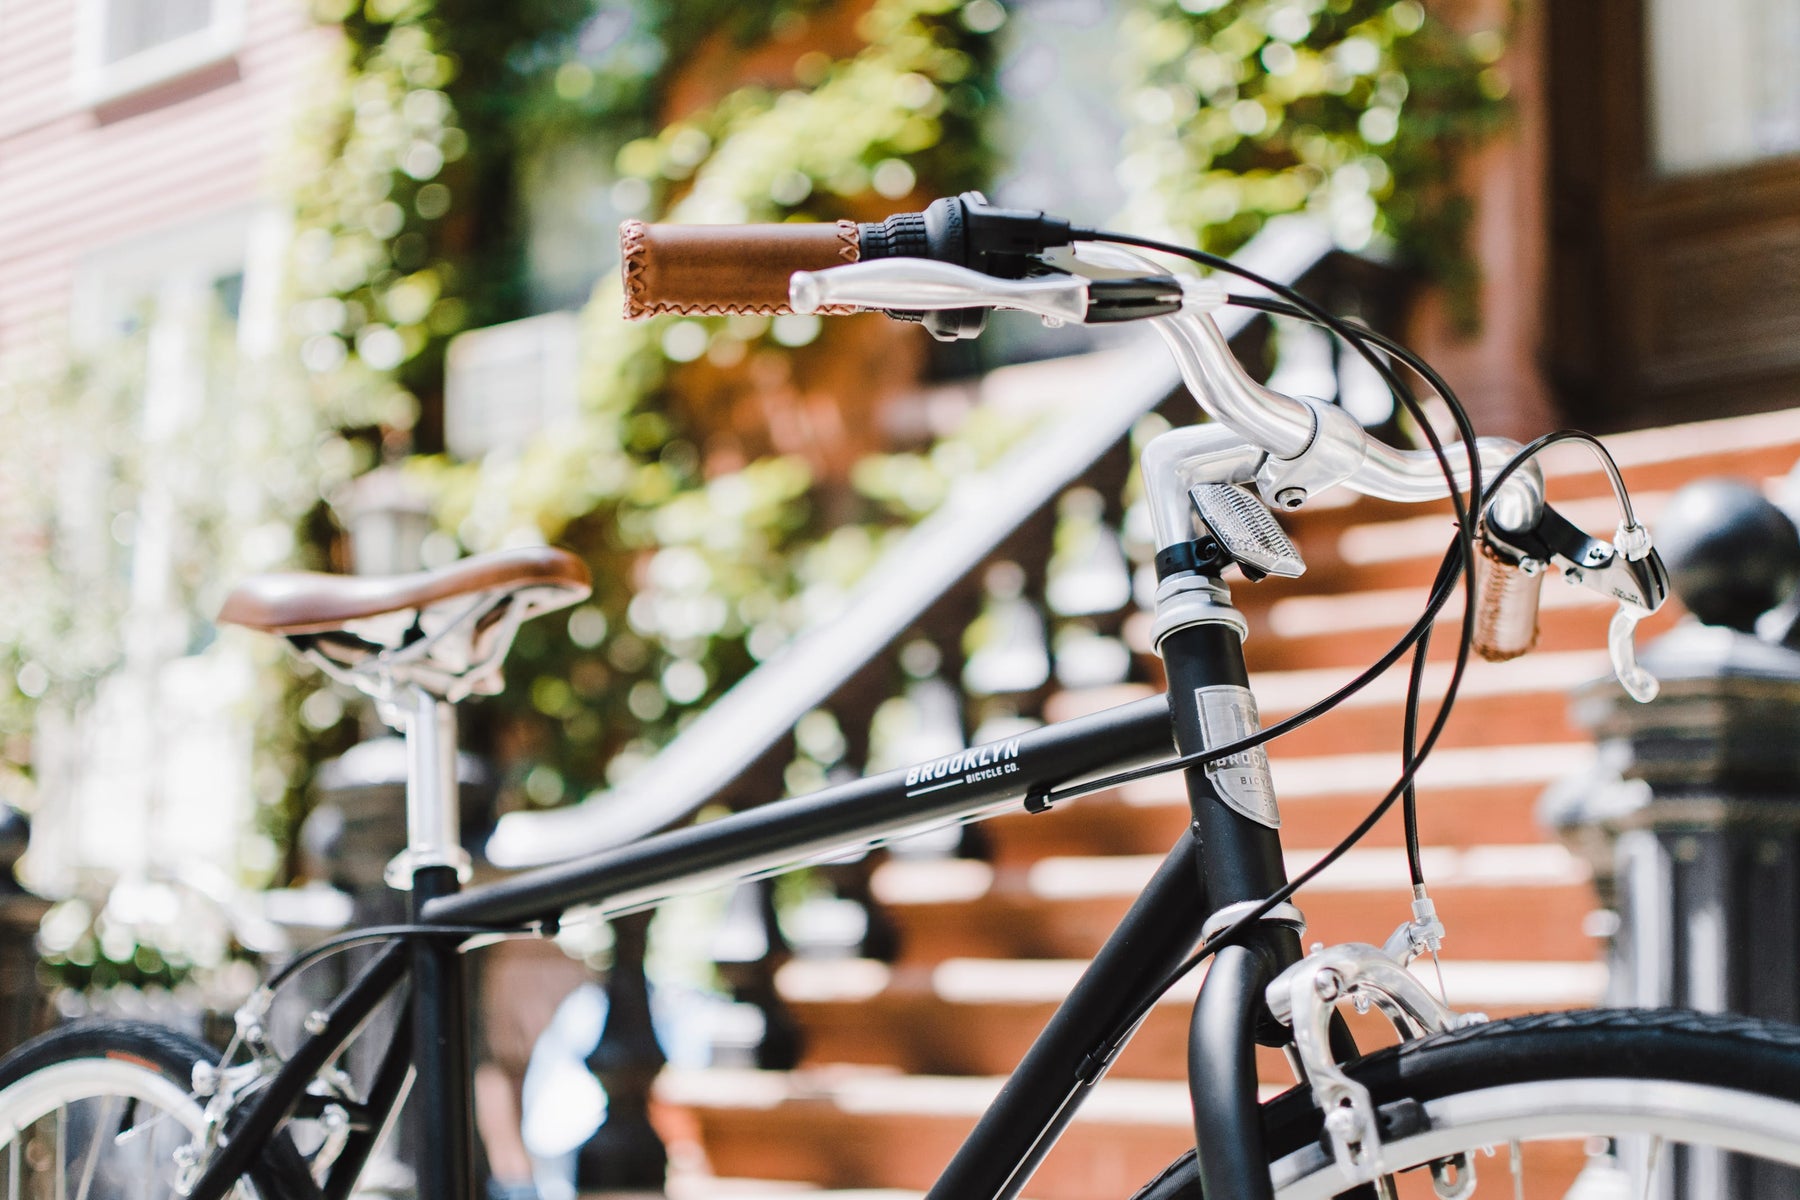 Matte Black Bedford commuter bicycle in front of brownstone steps